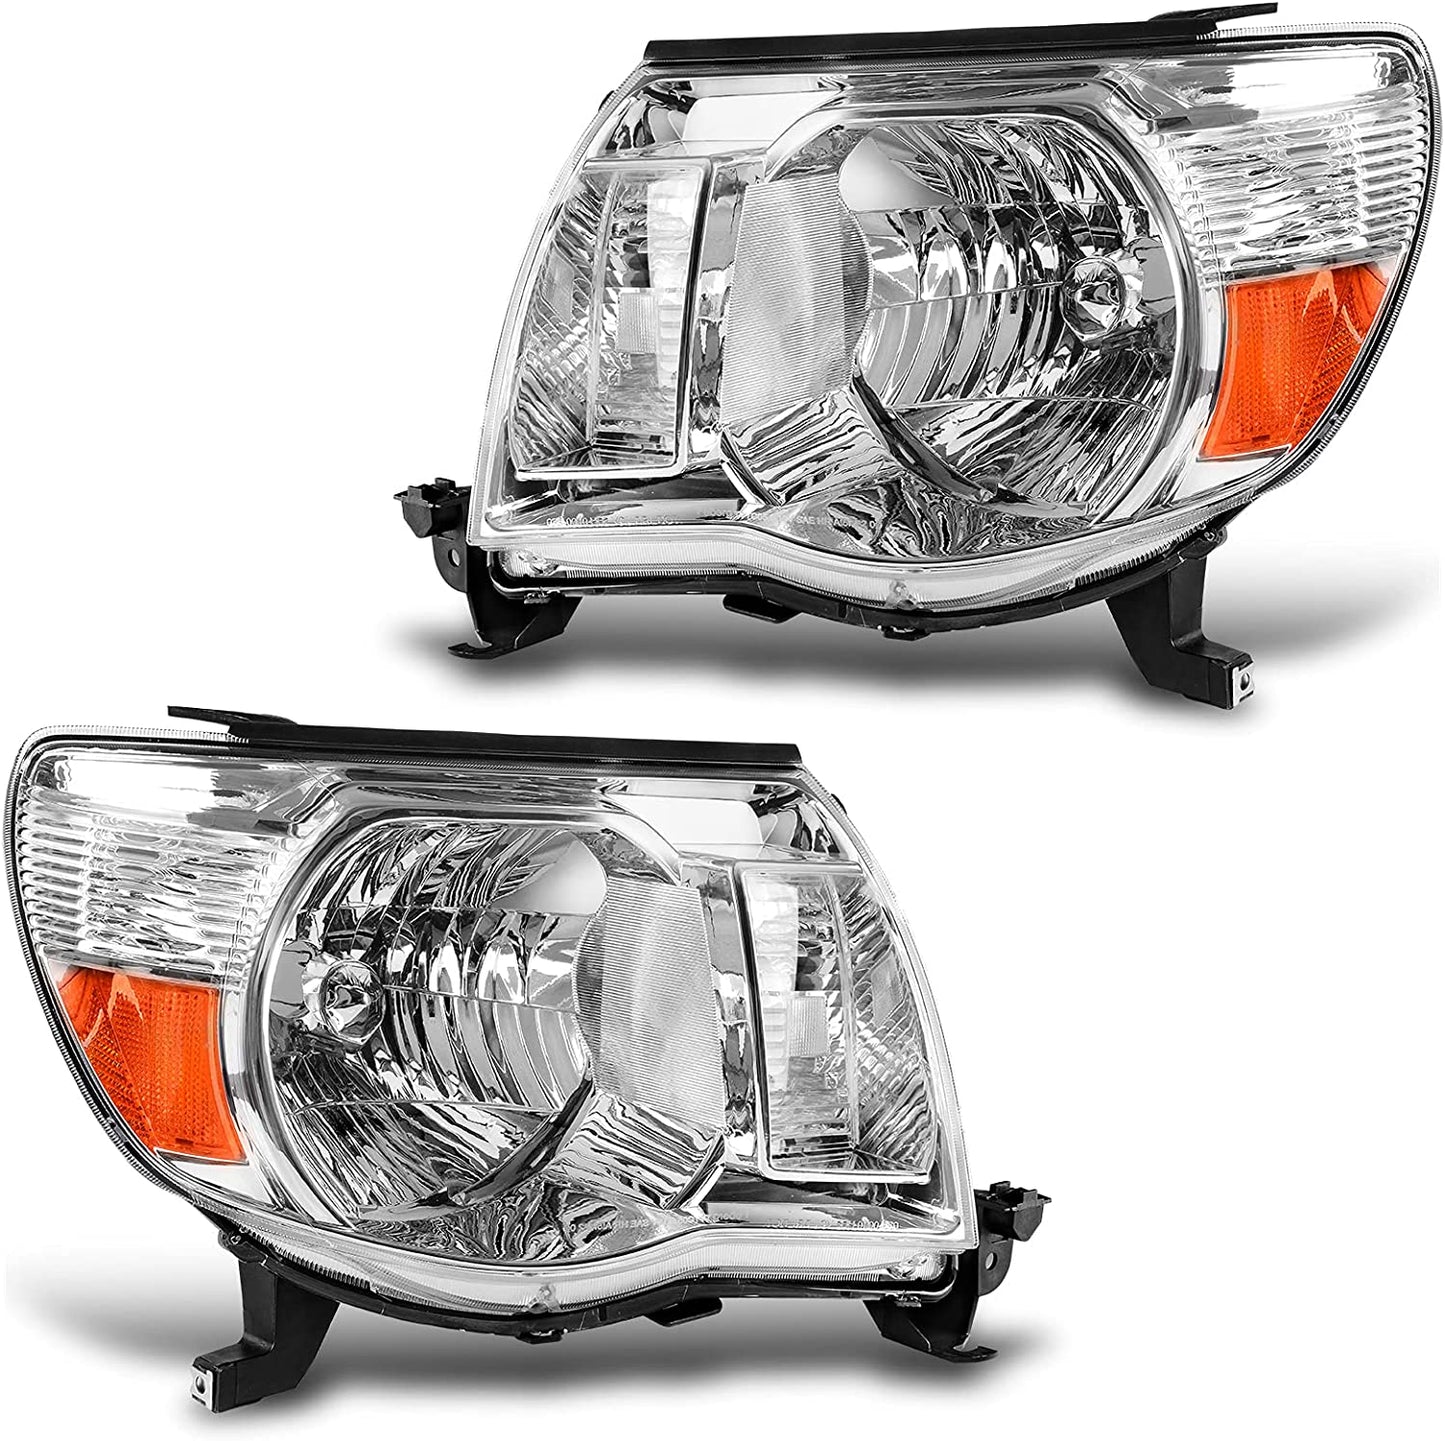 DWVO Headlight Assembly Compatible with 2005 2006 2007 2008 2009 2010 2011 Tacoma Pickup Truck OE Replacement Chrome Housing with Amber Reflector